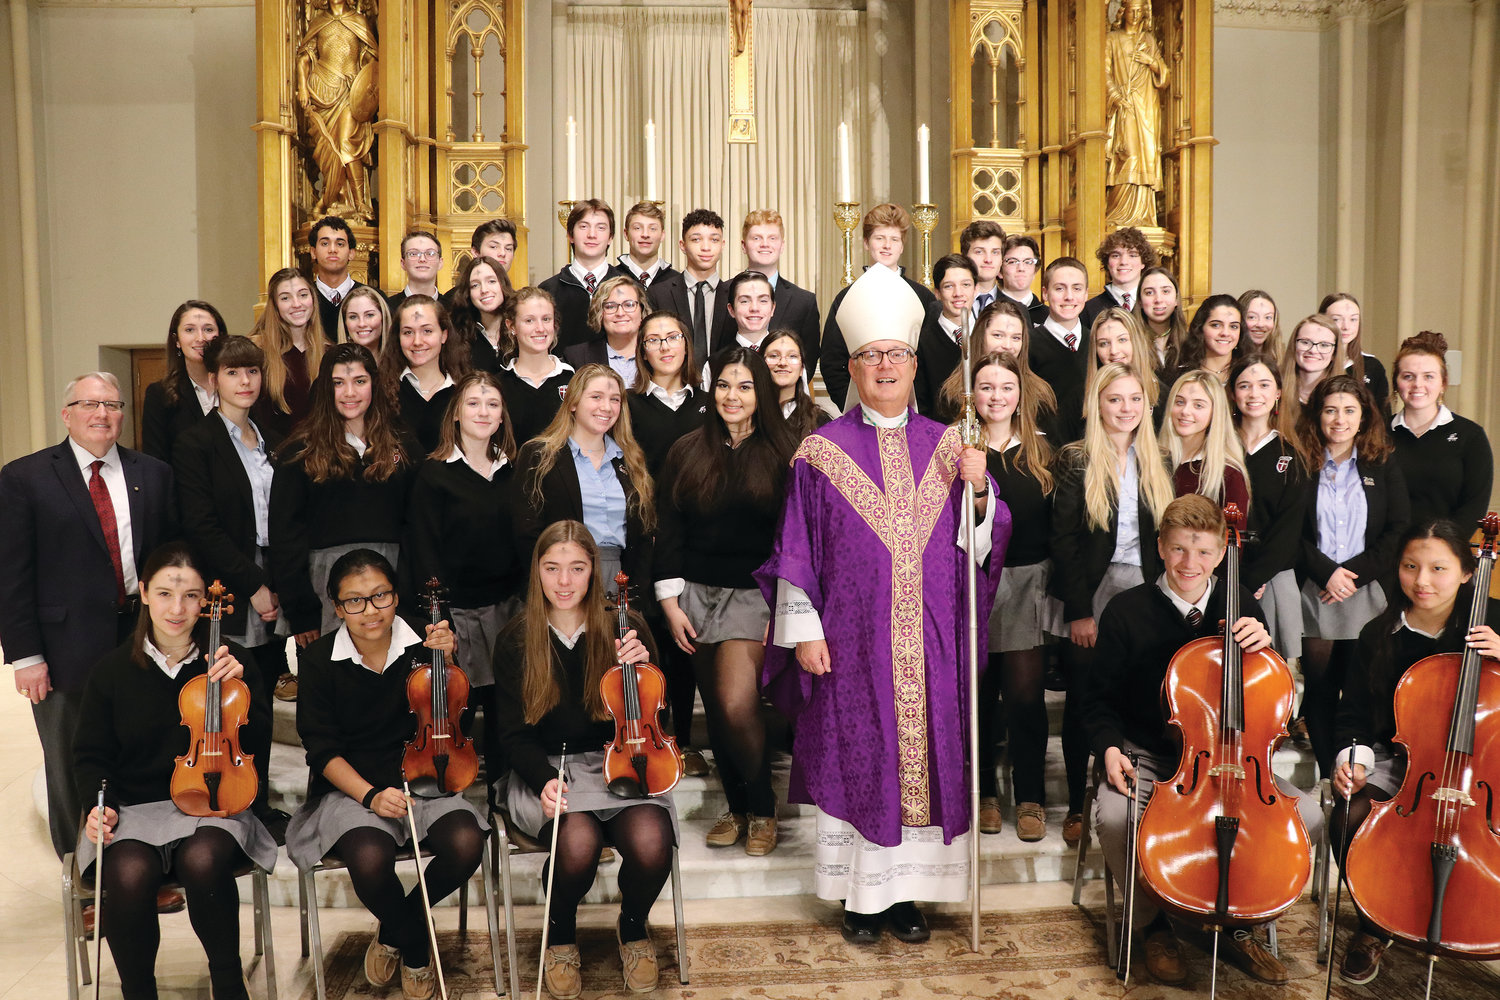 Bishop Tobin smiles with The Prout School Choir.